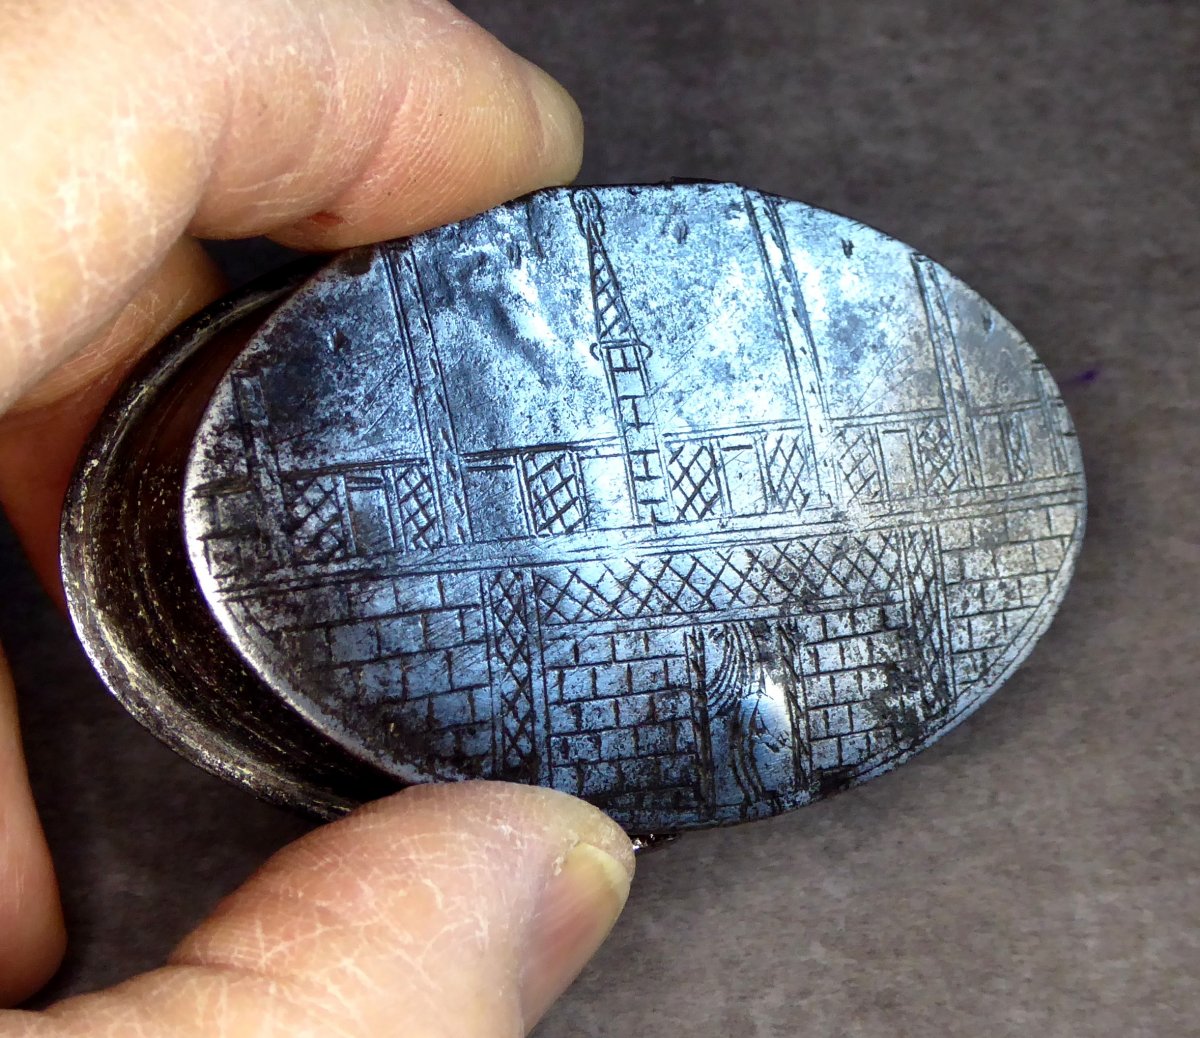 Engraved Iron Oval Box, Russia? Early 18th Century: St Petersburg?